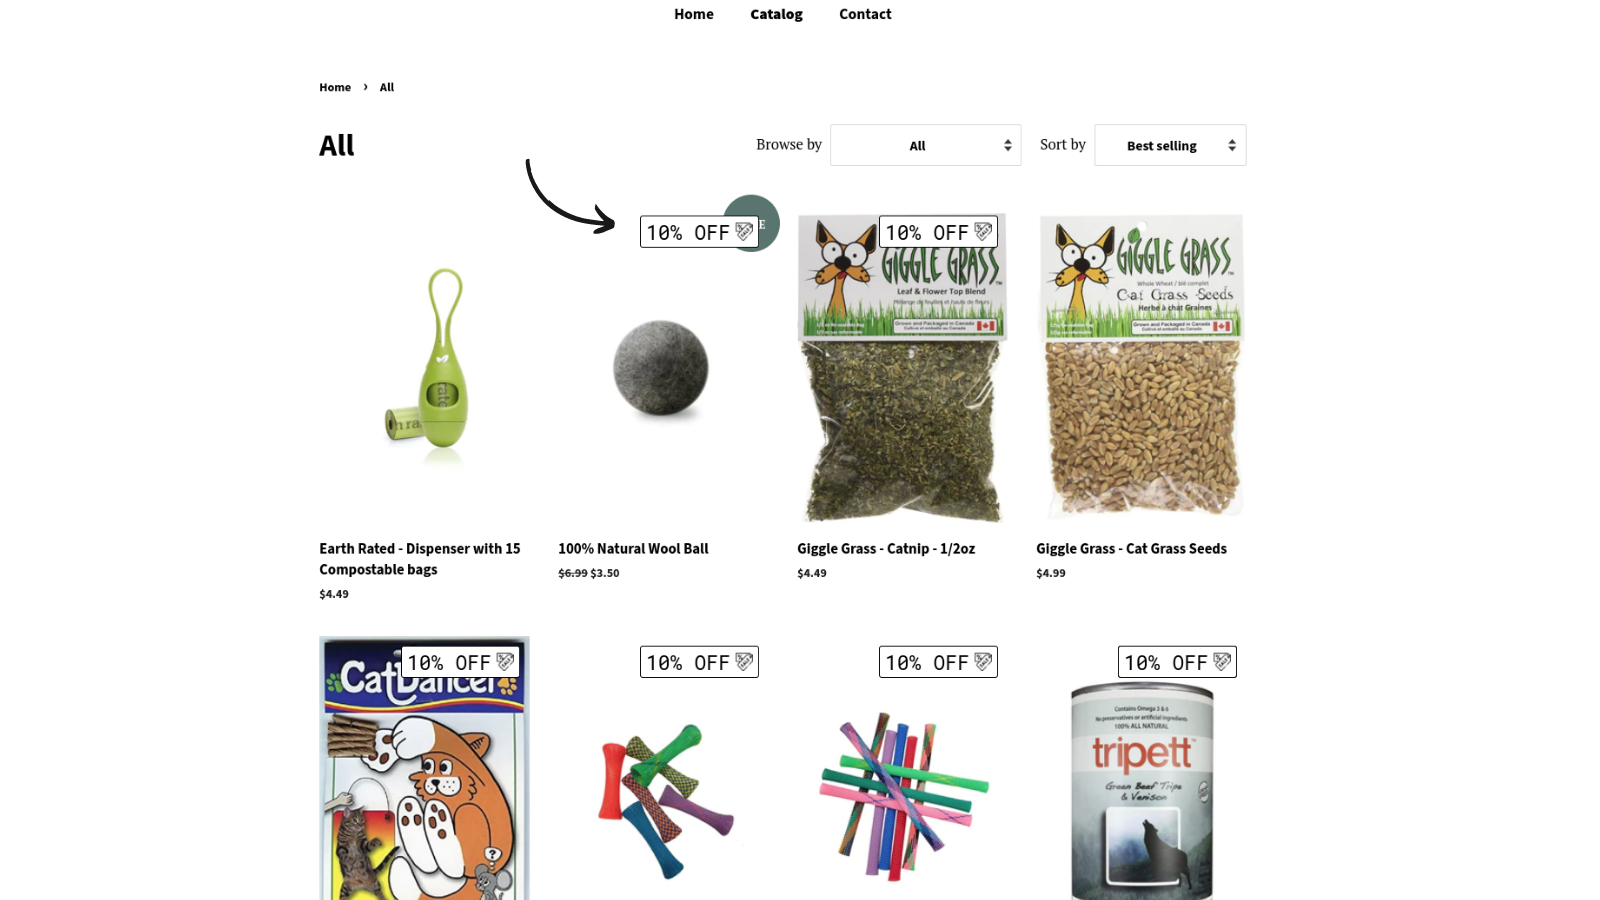 Promote in catalog page